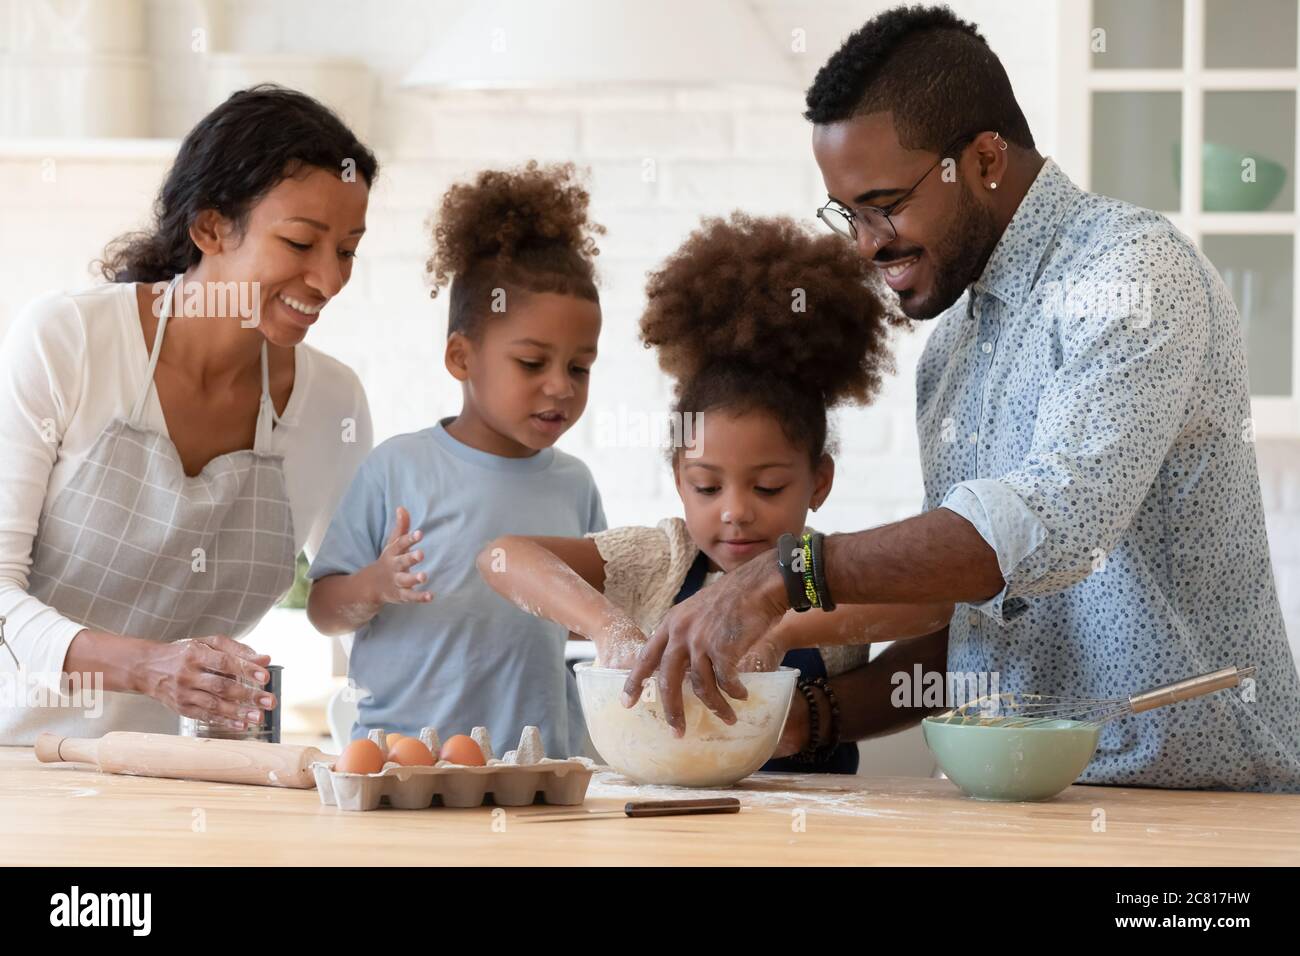 https://c8.alamy.com/comp/2C817HW/happy-african-american-family-with-kids-baking-at-home-2C817HW.jpg